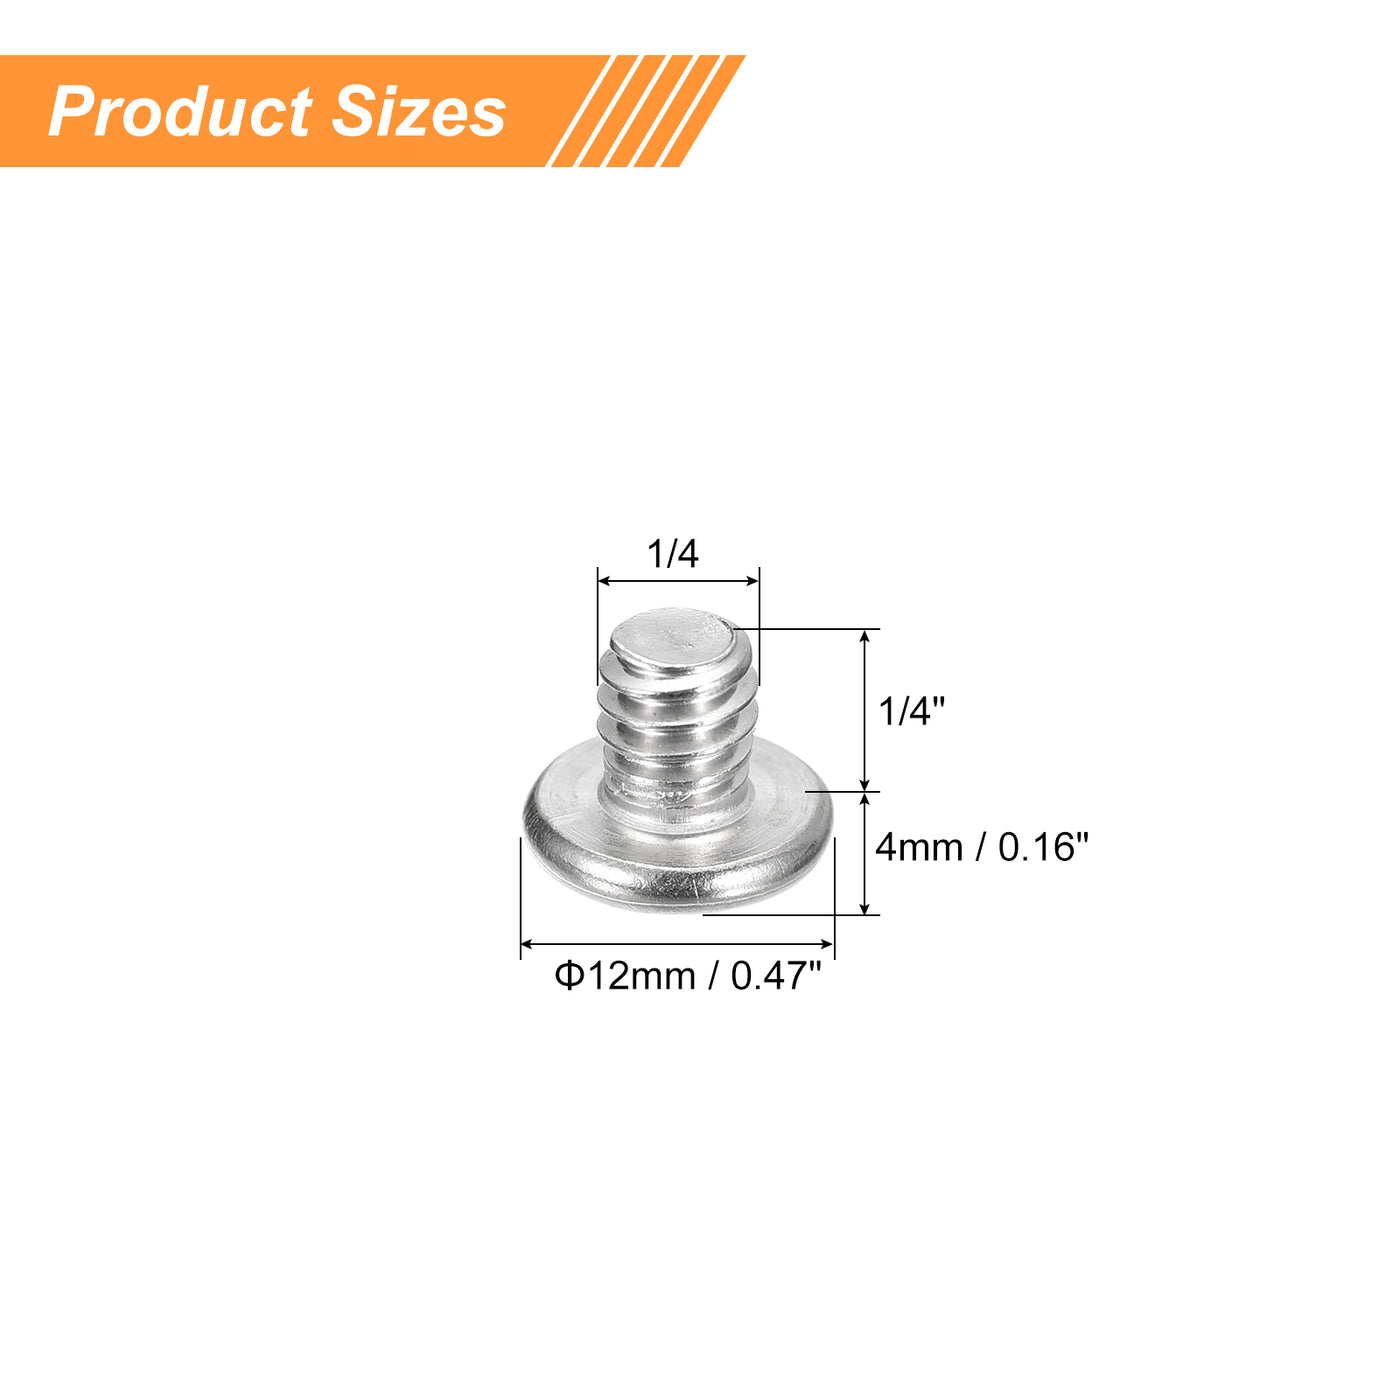 uxcell Uxcell 1/4-20x1/4" Pan Head Machine Screws, Stainless Steel 18-8 Screw, Pack of 20